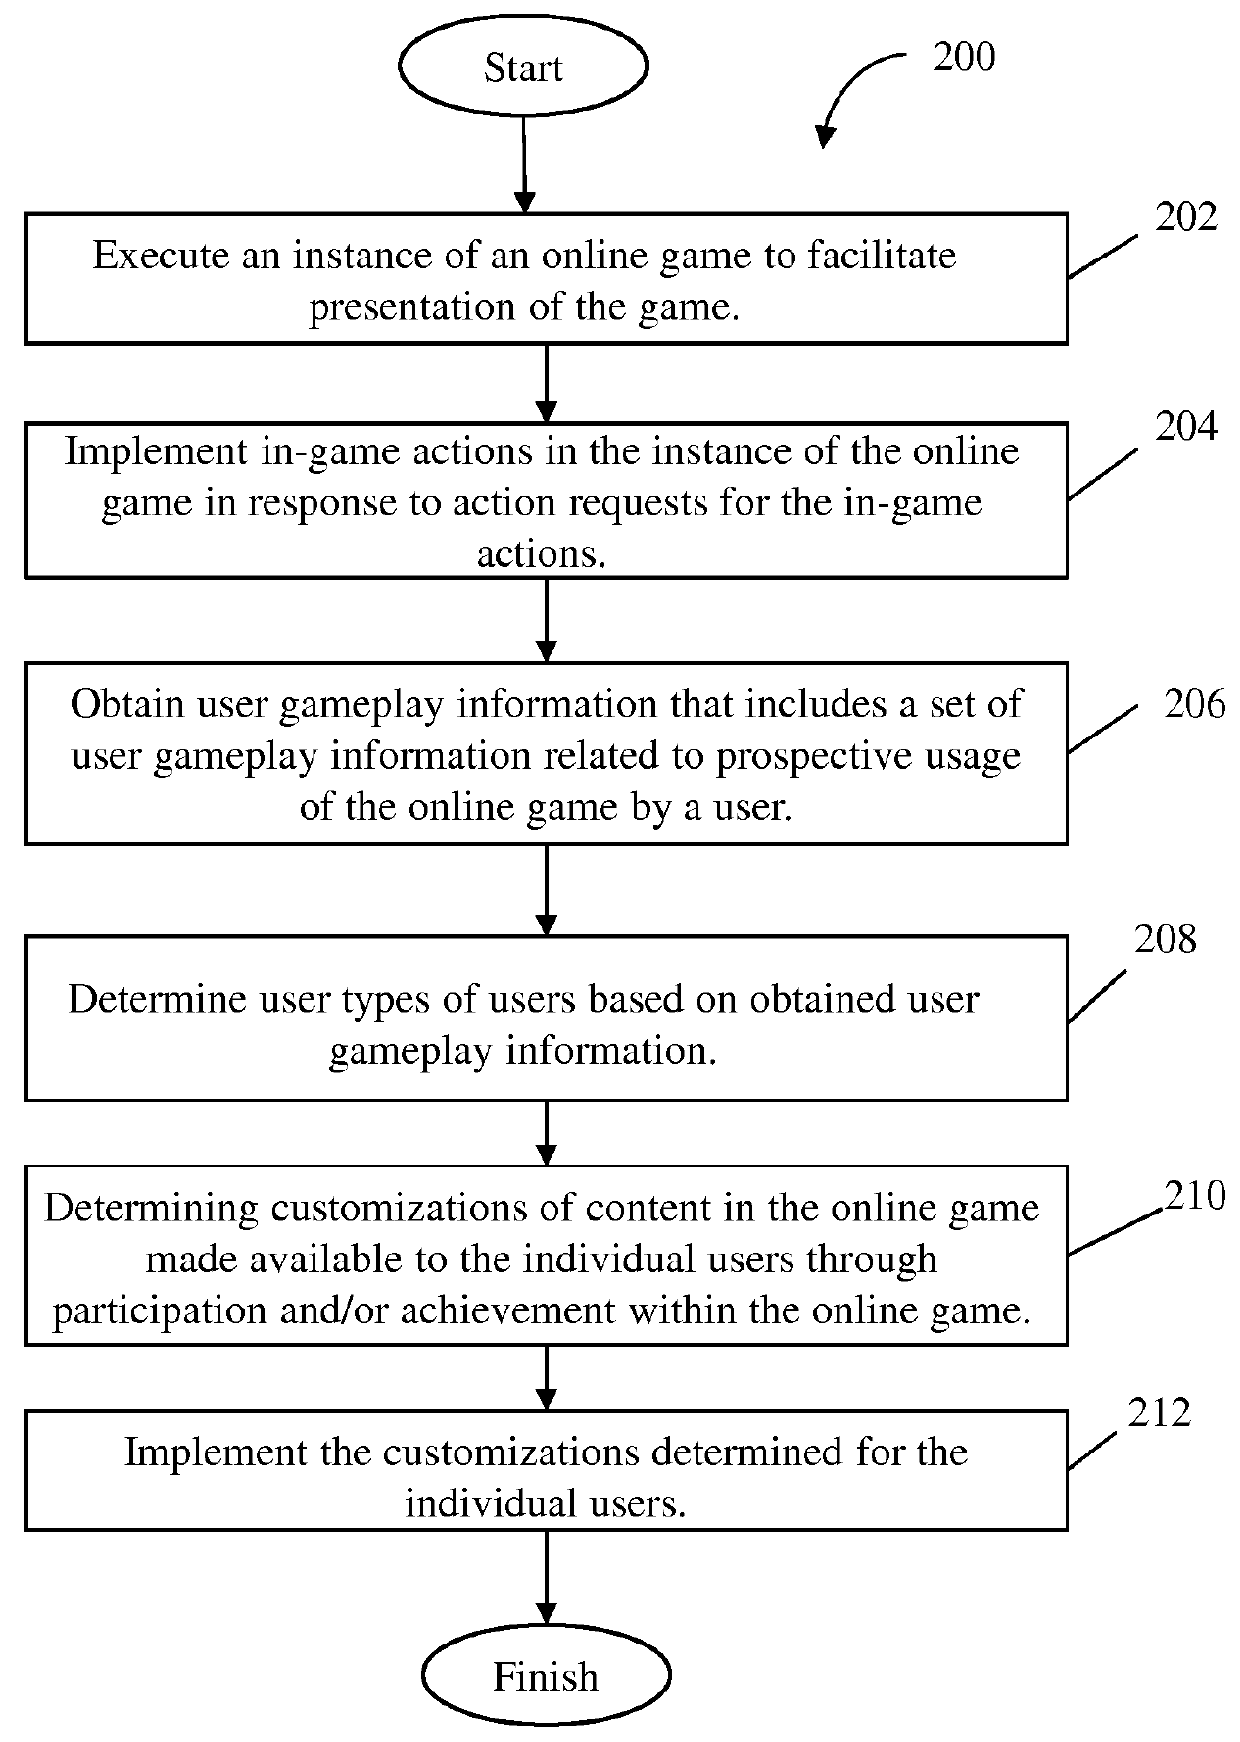 Adjusting individualized content made available to users of an online game based on user gameplay information